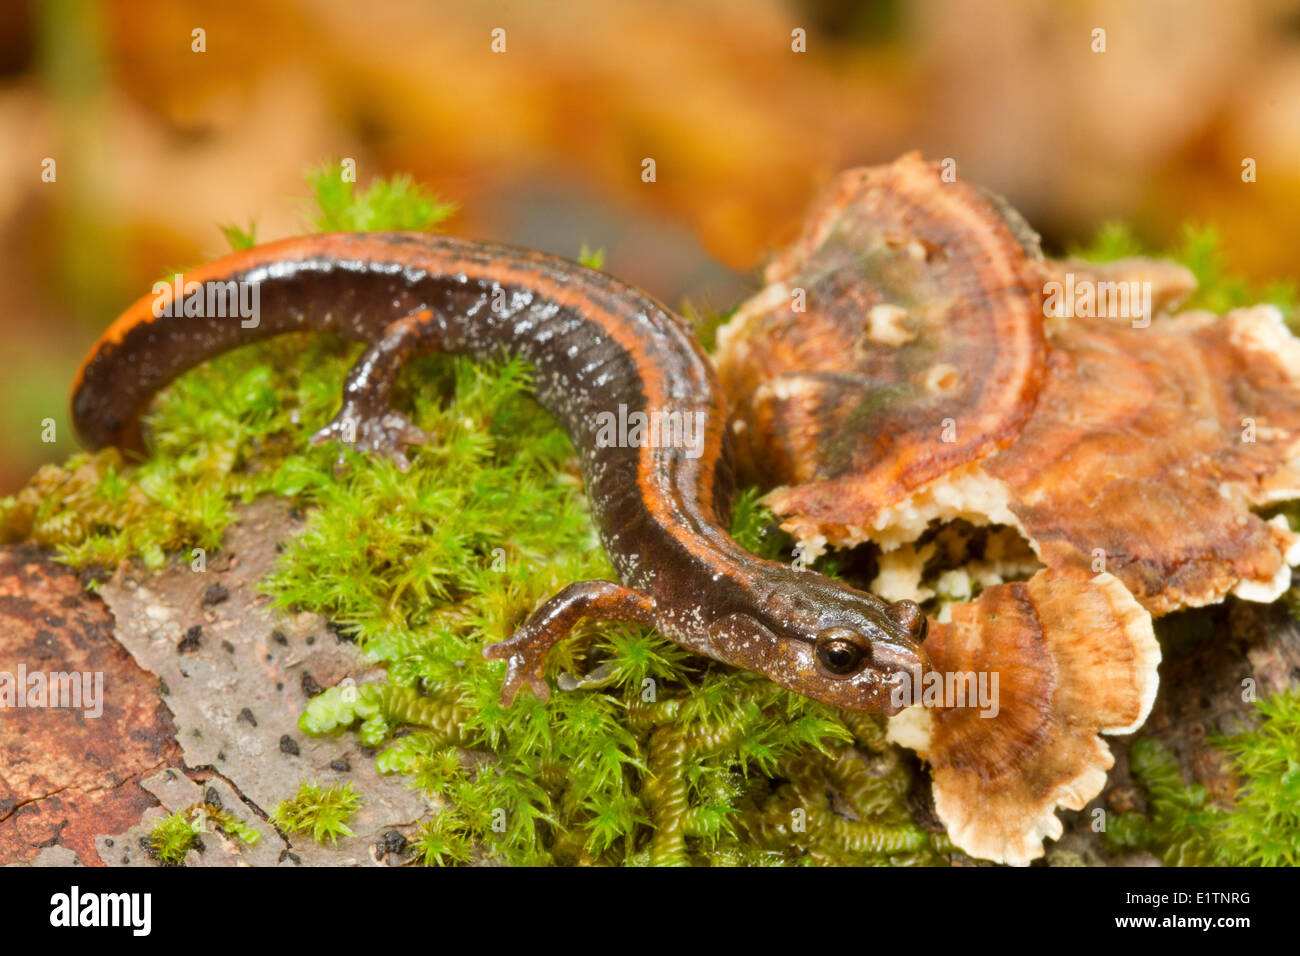 Plethodon vehiculum, Western Red-backed salamander, Victoria, BC, Canada Foto Stock